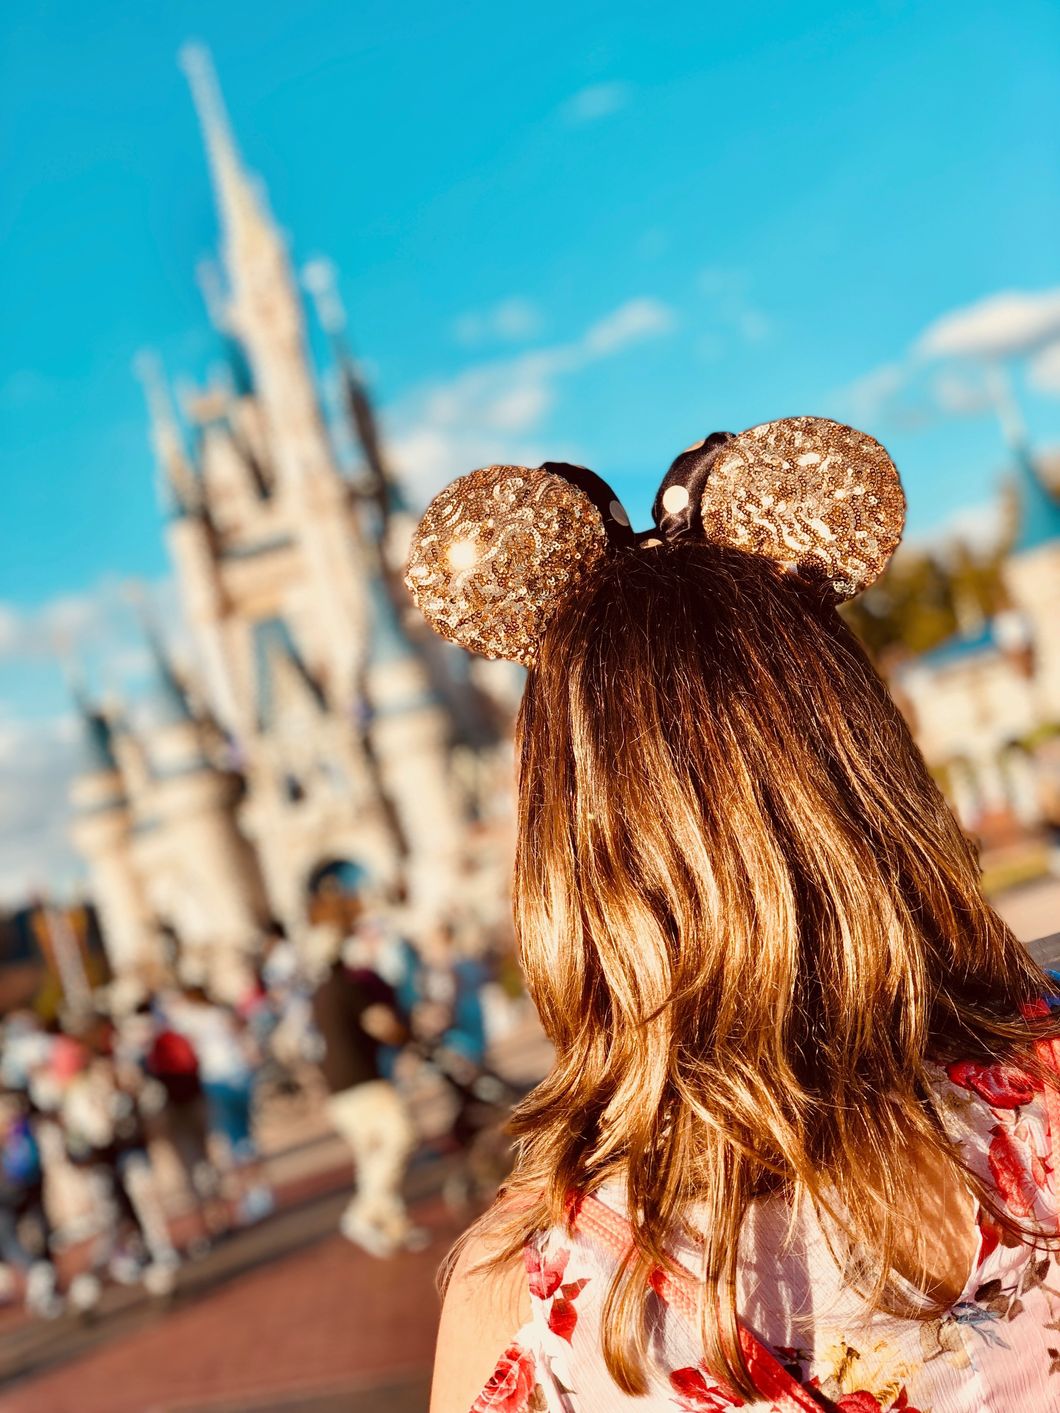 Confessions Of A Disney College Program Applicant Stuck in "AR"